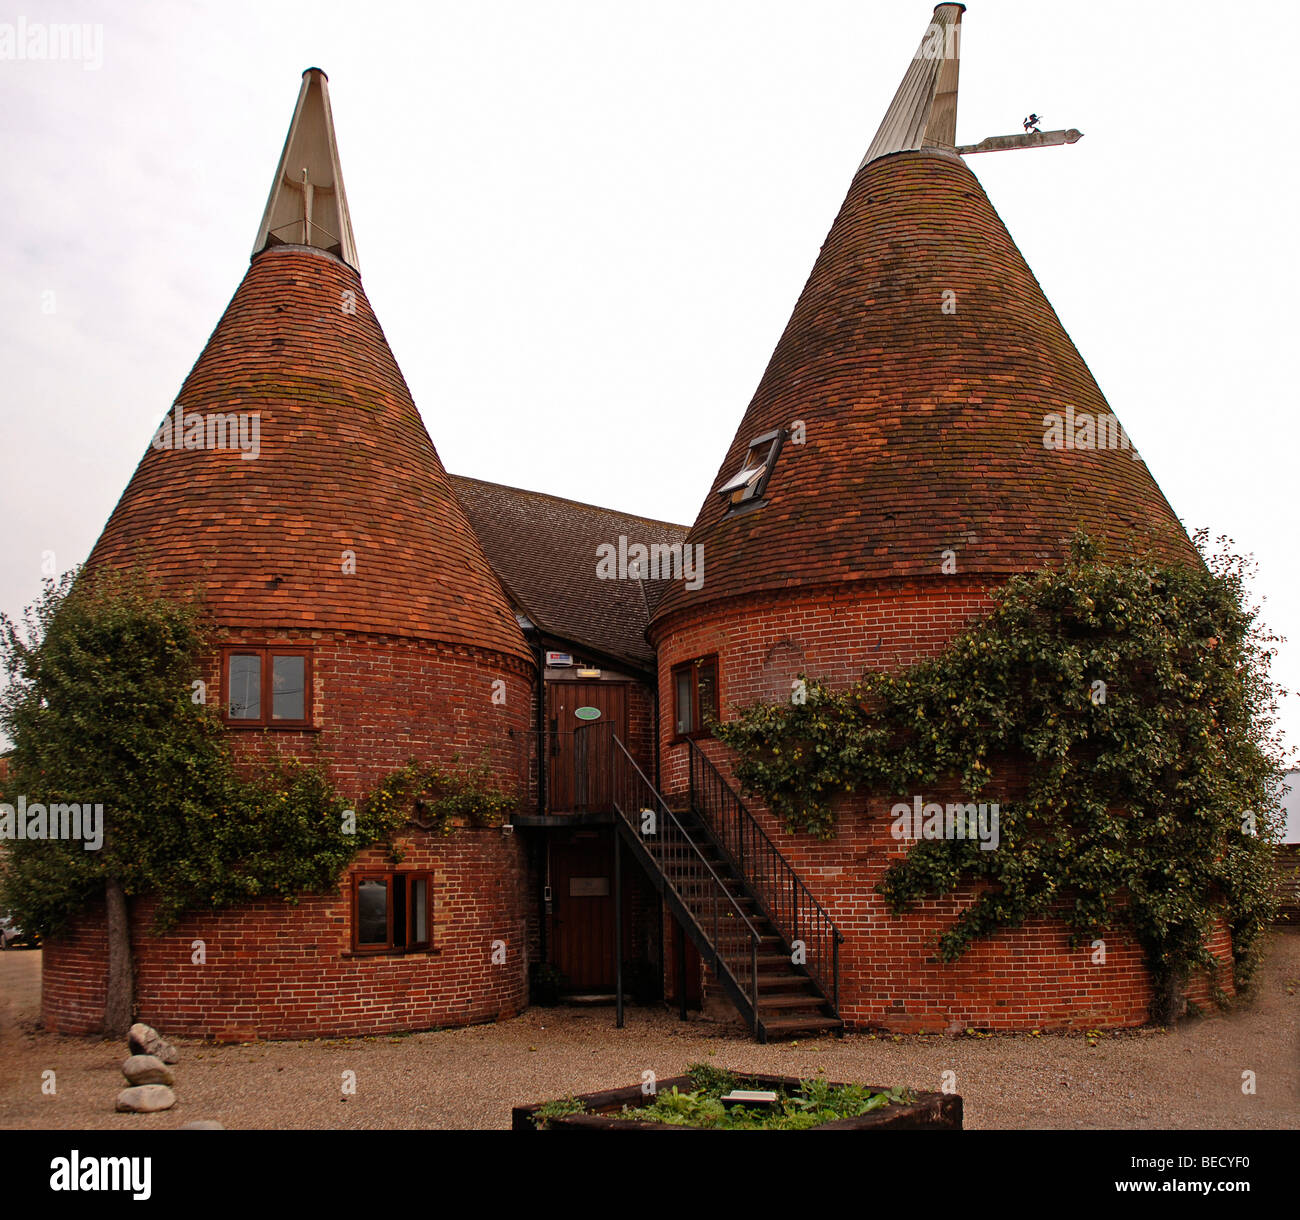 Two oast houses, for drying hops, now rebuilt into a flat, county of Kent, England, Europe Stock Photo